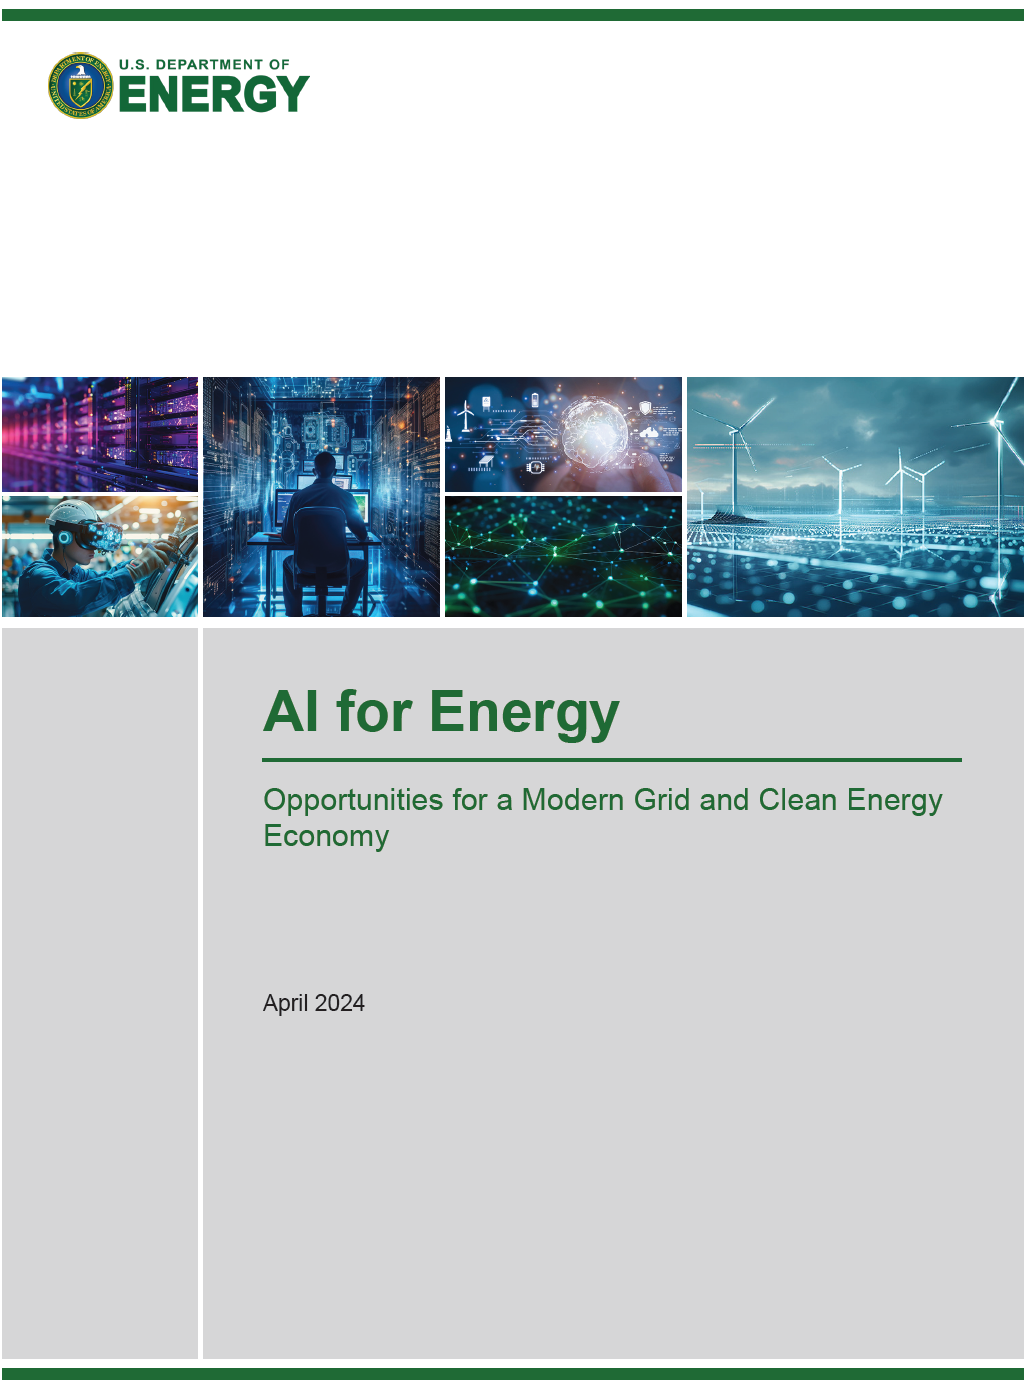 AI for Energy: Opportunities for a Modern Grid and Clean Energy Economy